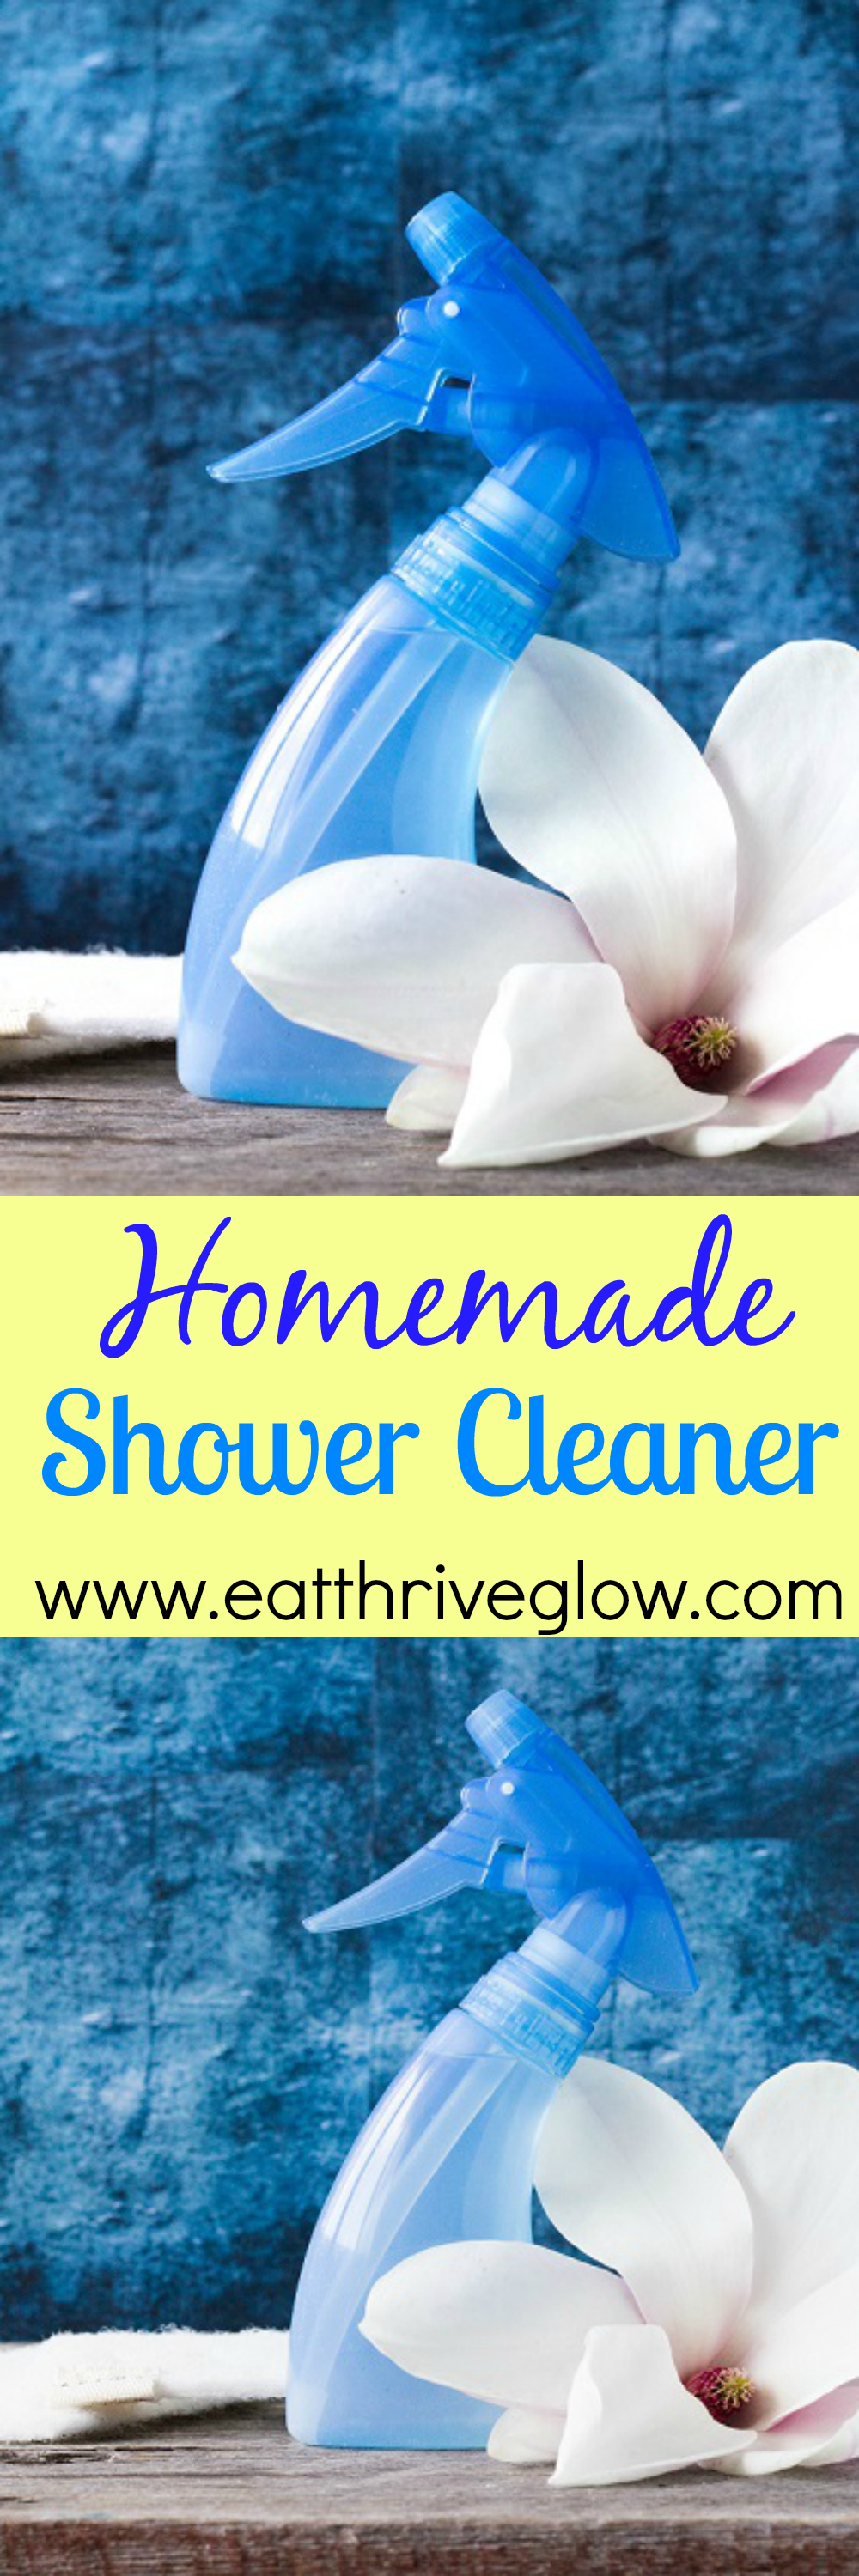 Homemade Shower Cleaner - Eat Thrive Glow